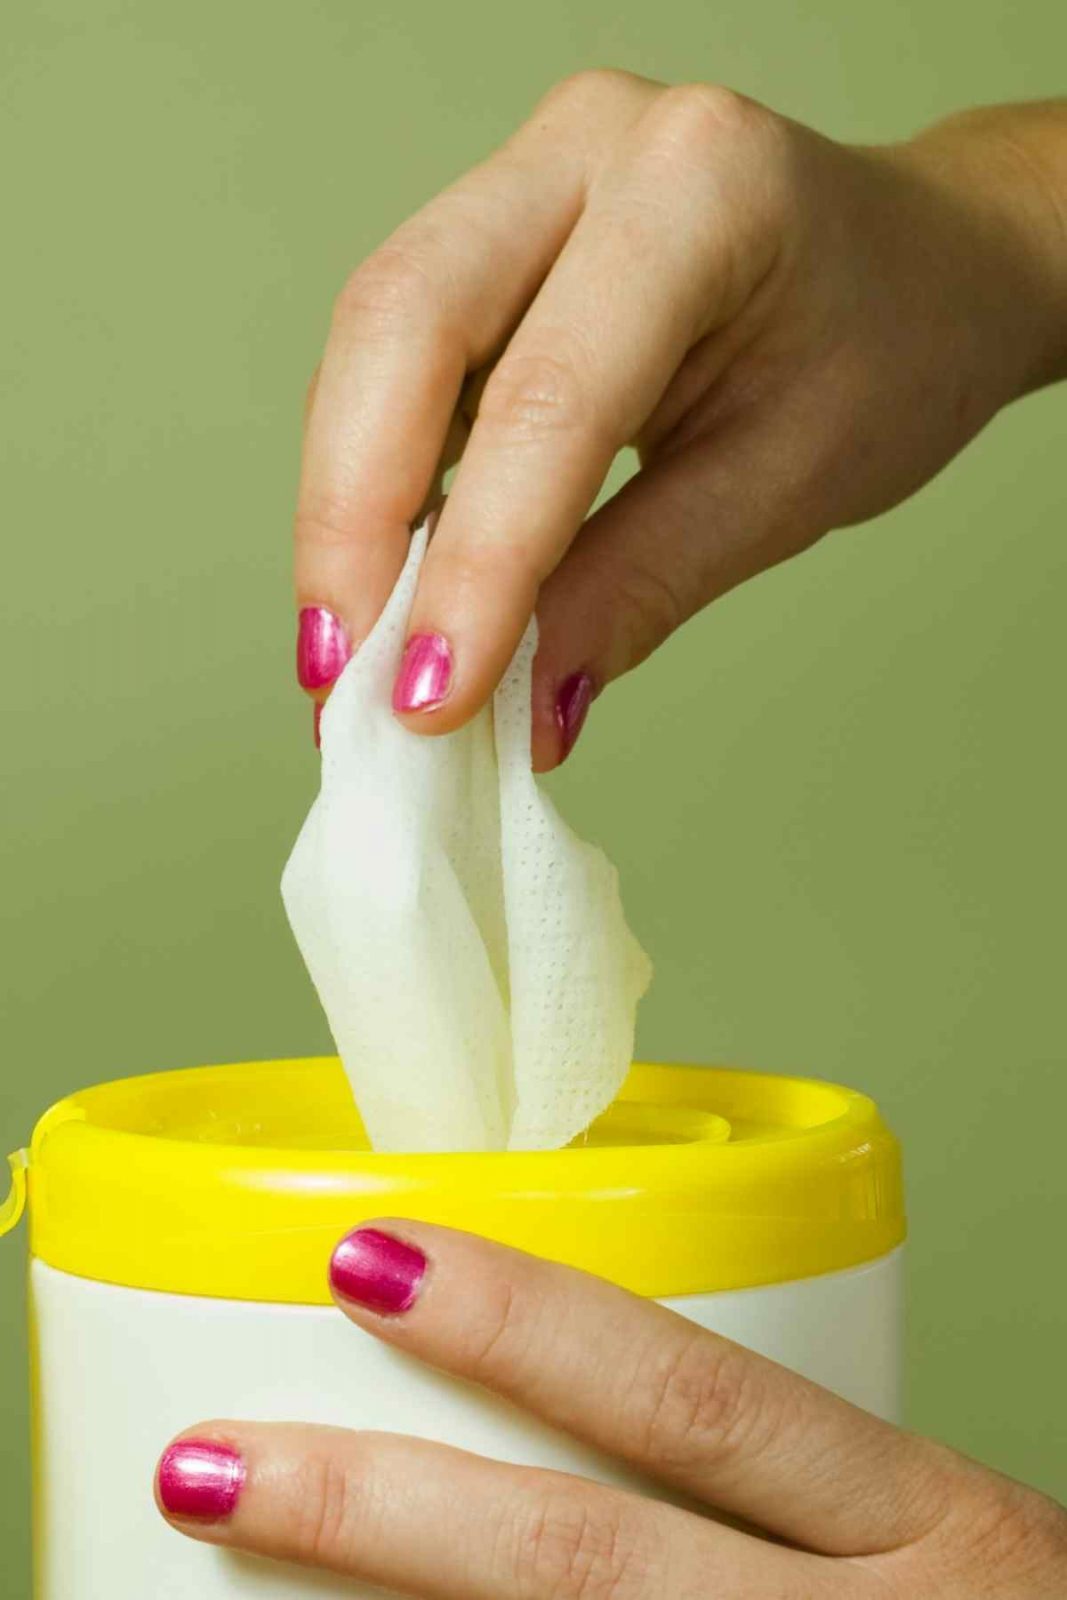 Homemade Clorox wipes are a handy, inexpensive way to disinfect high-touch areas in your home.